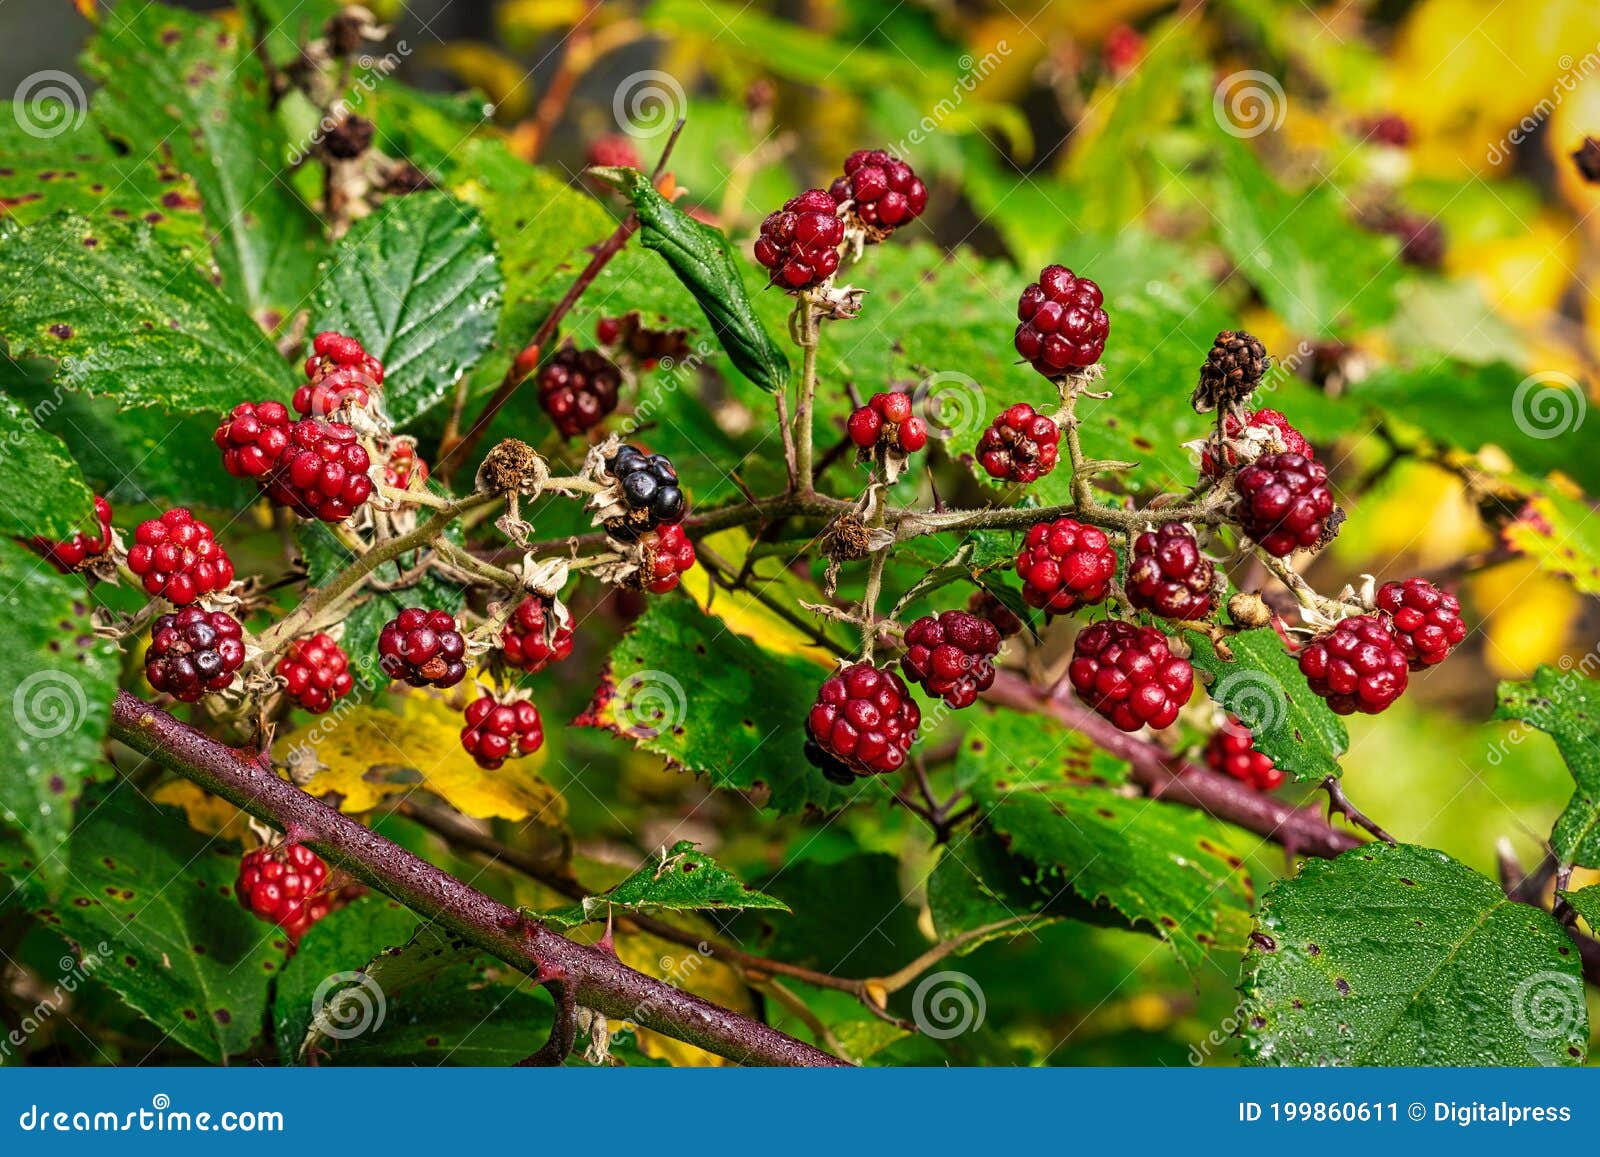 uncultivated berries in forest